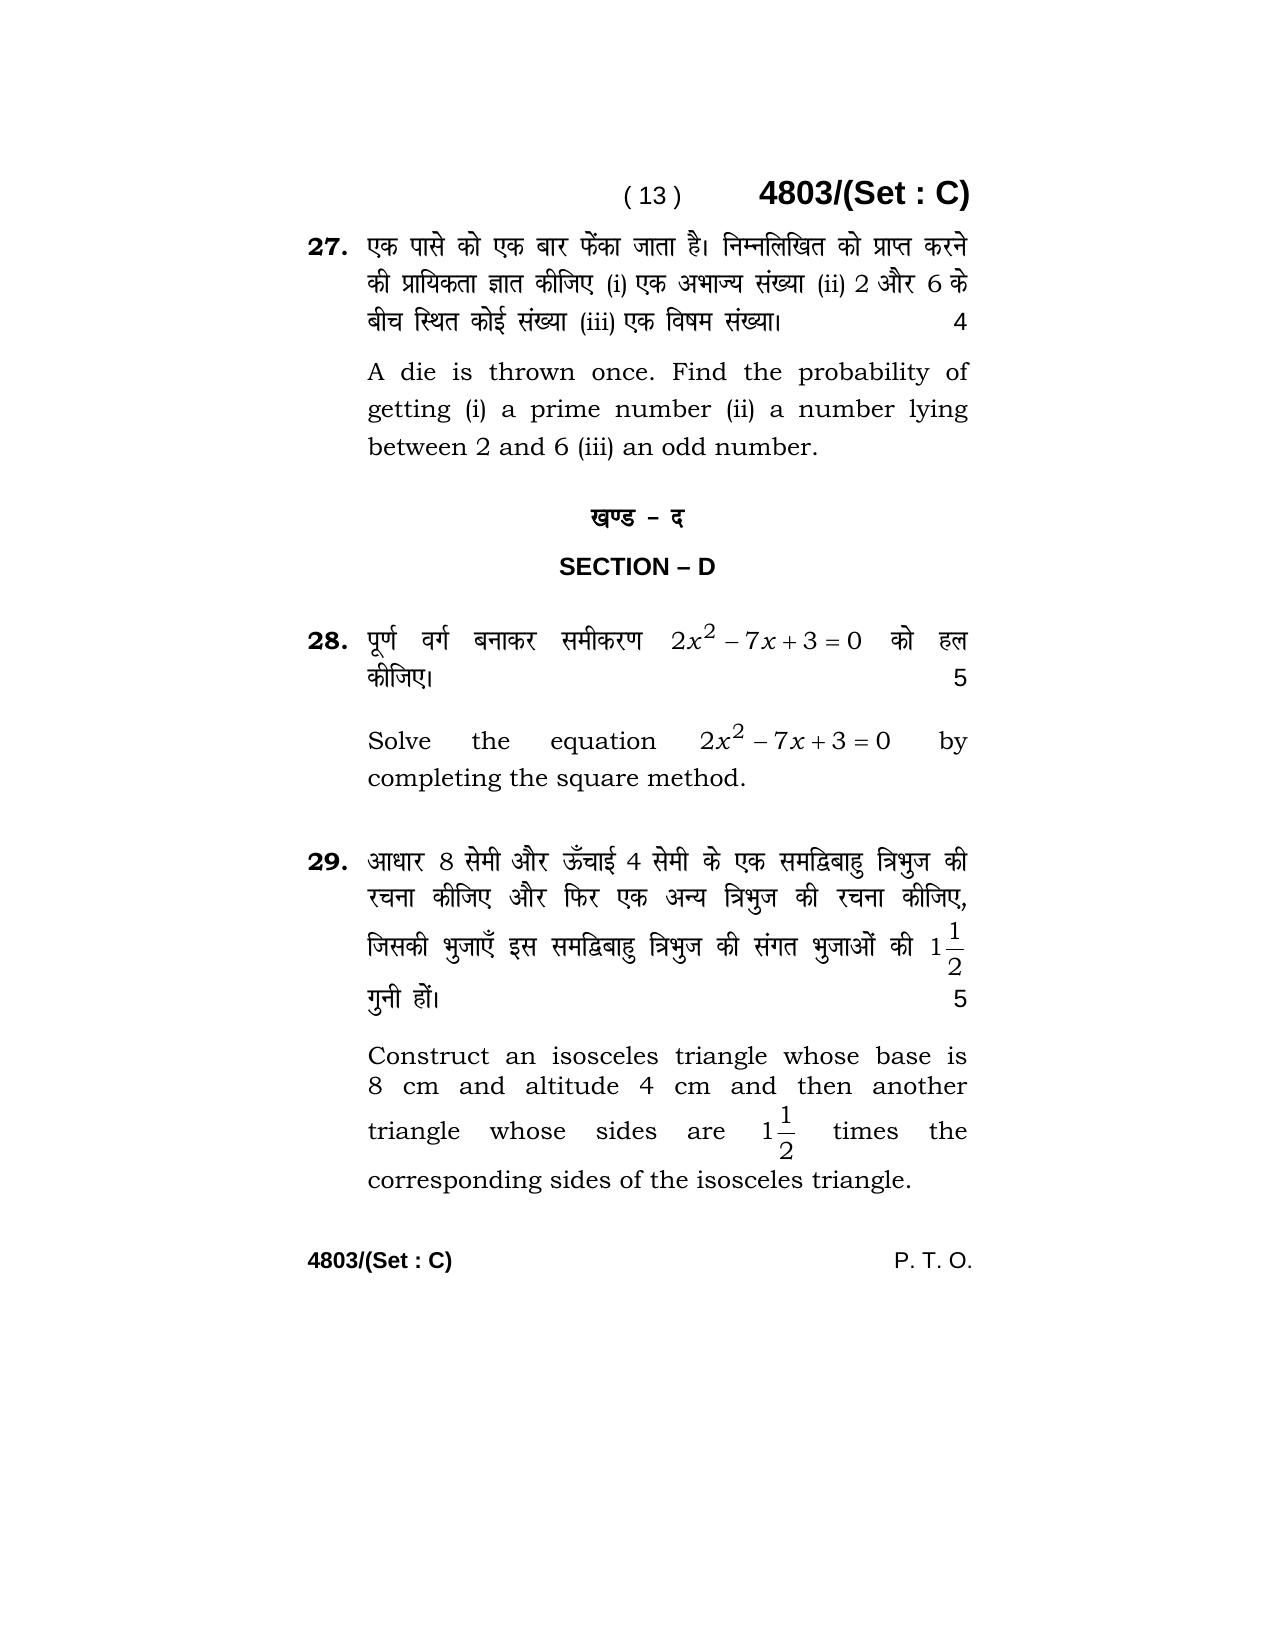 Haryana Board HBSE Class 10 Mathematics 2020 Question Paper - Page 45